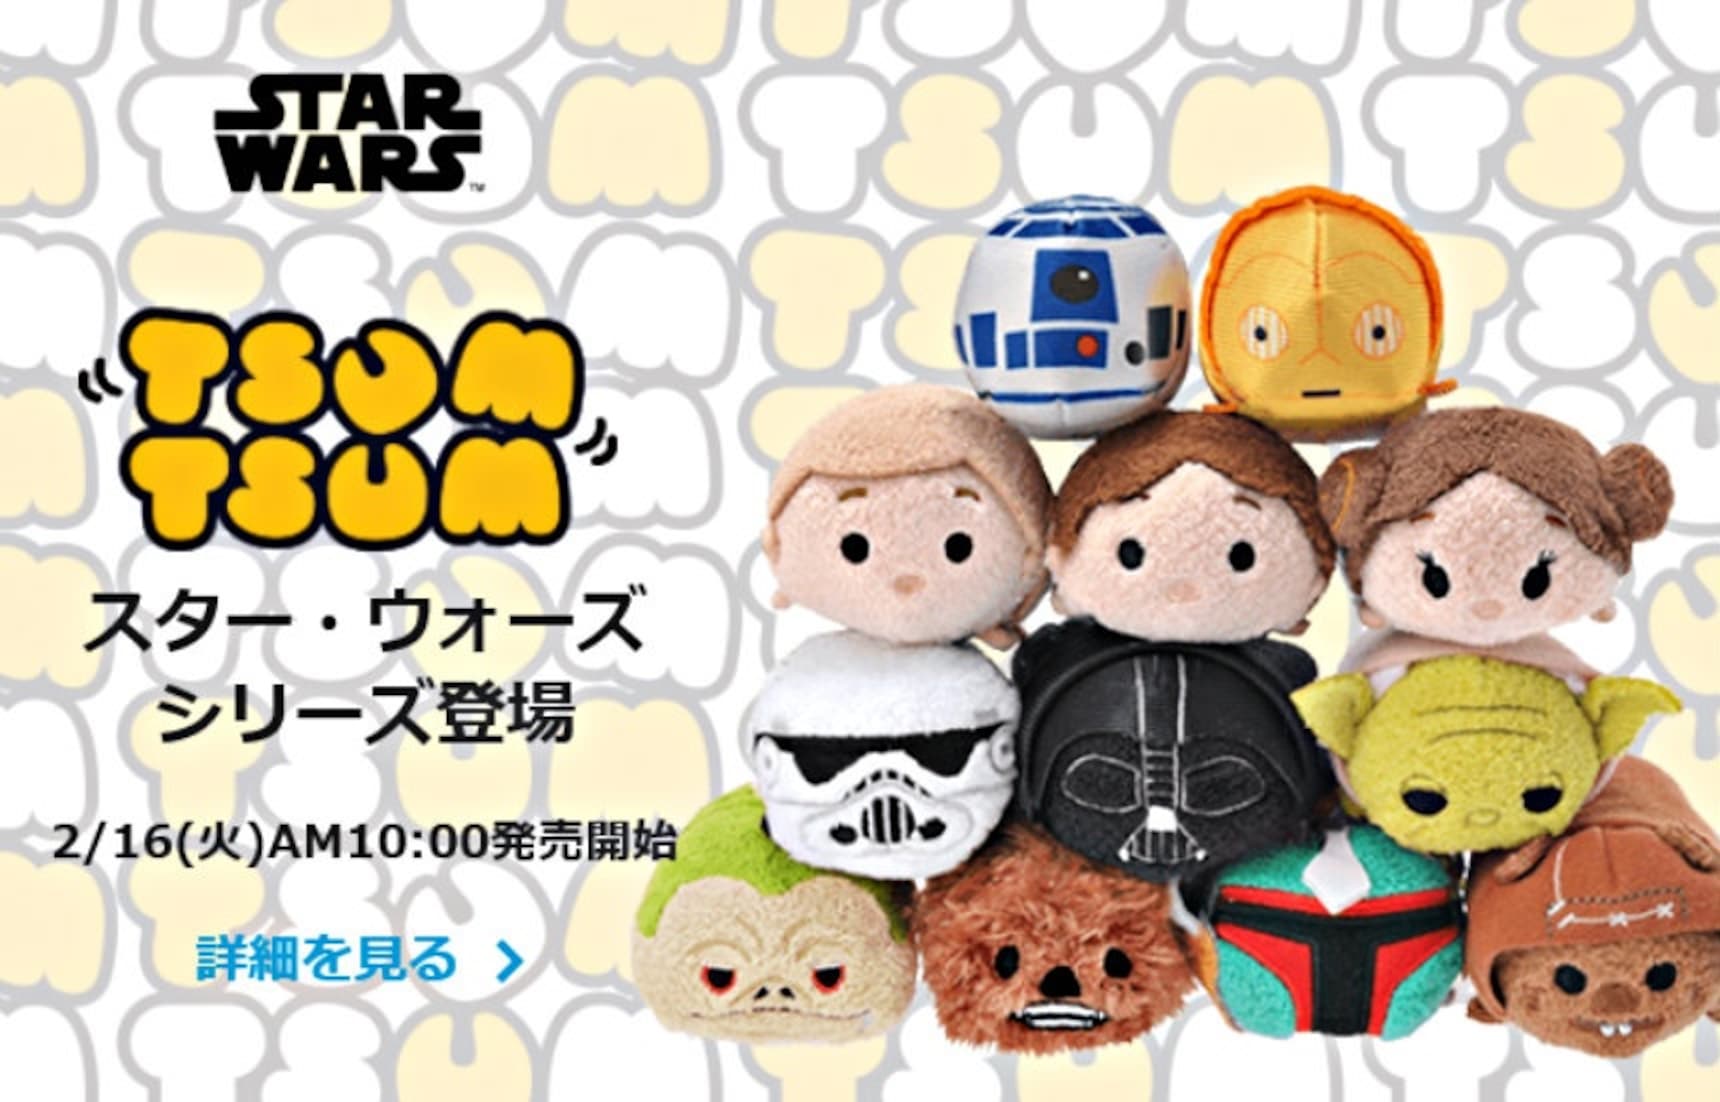 Coming Tsum to Our Galaxy!